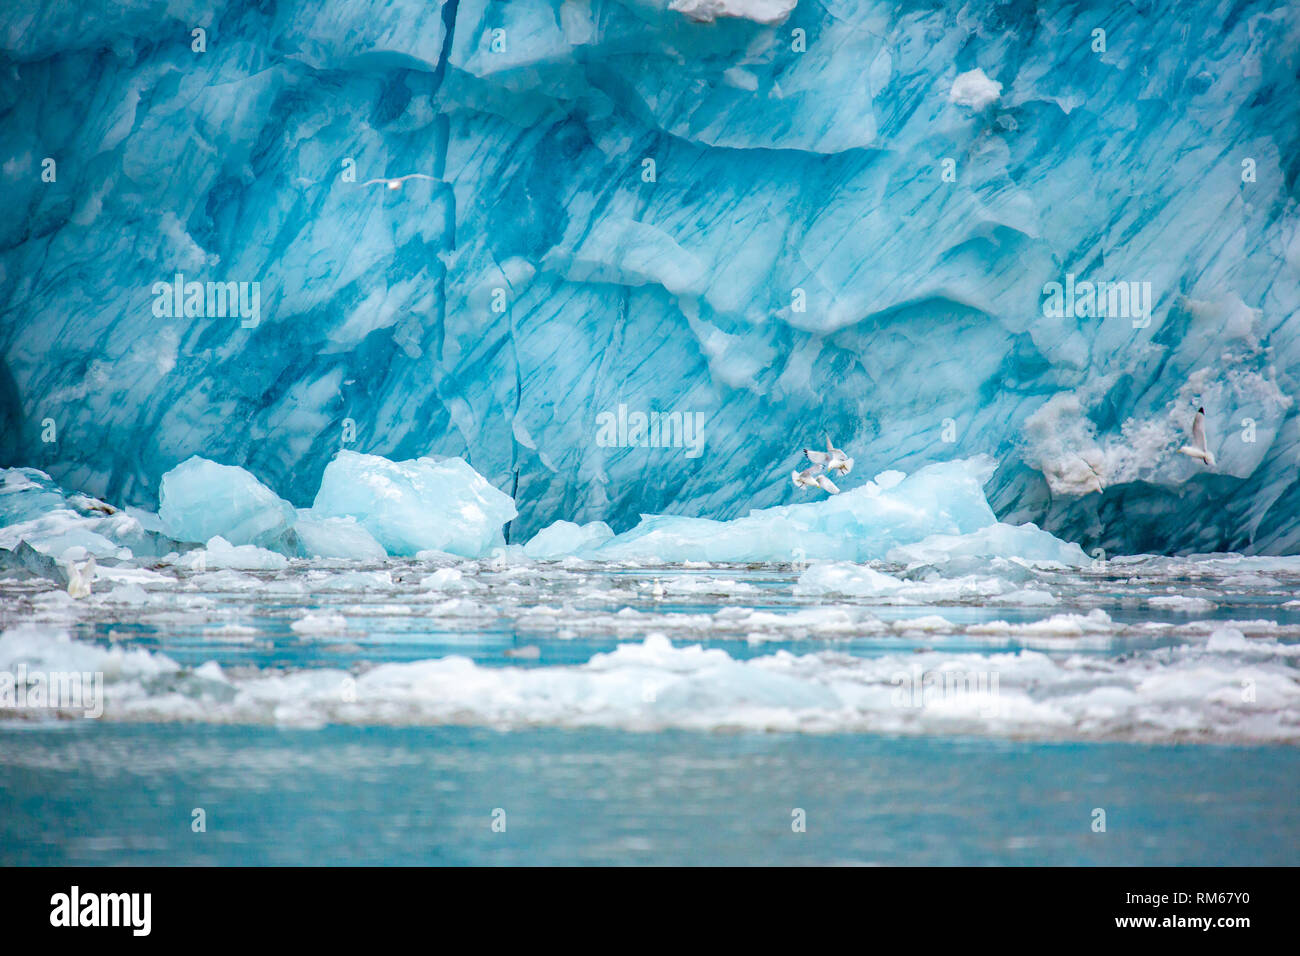 The ice of blue icebergs contains fewer air bubbles than those appearing more or less white. On rainy days their colour appears particularly intense.  Stock Photo